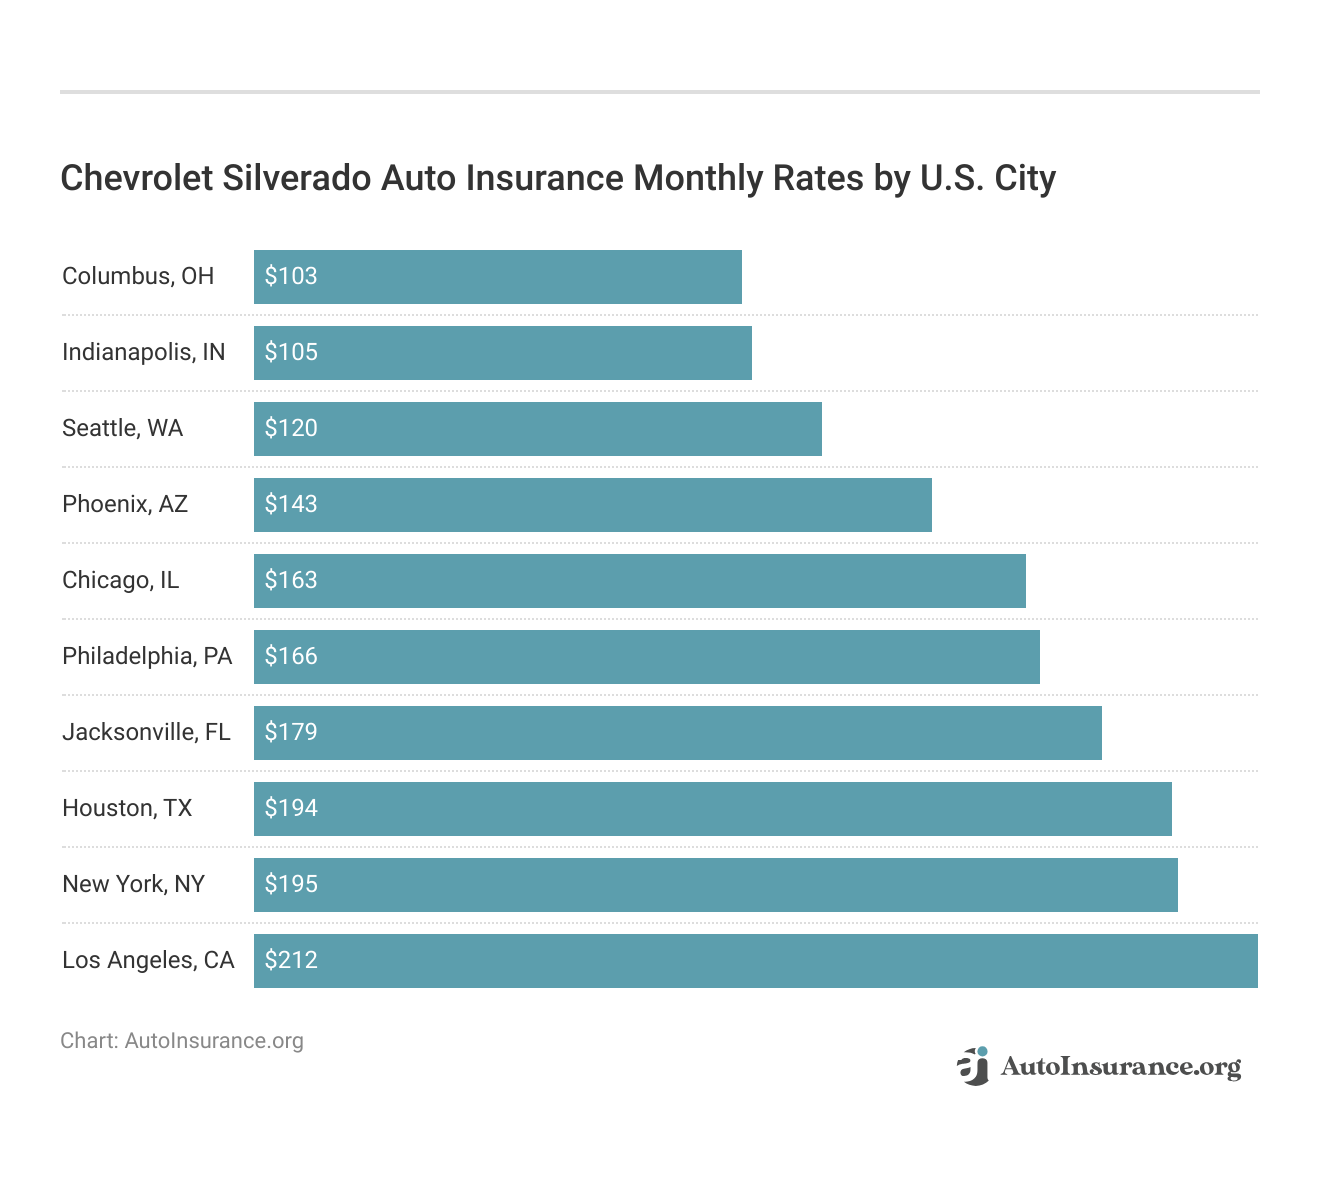 <h3>Chevrolet Silverado Auto Insurance Monthly Rates by U.S. City</h3>